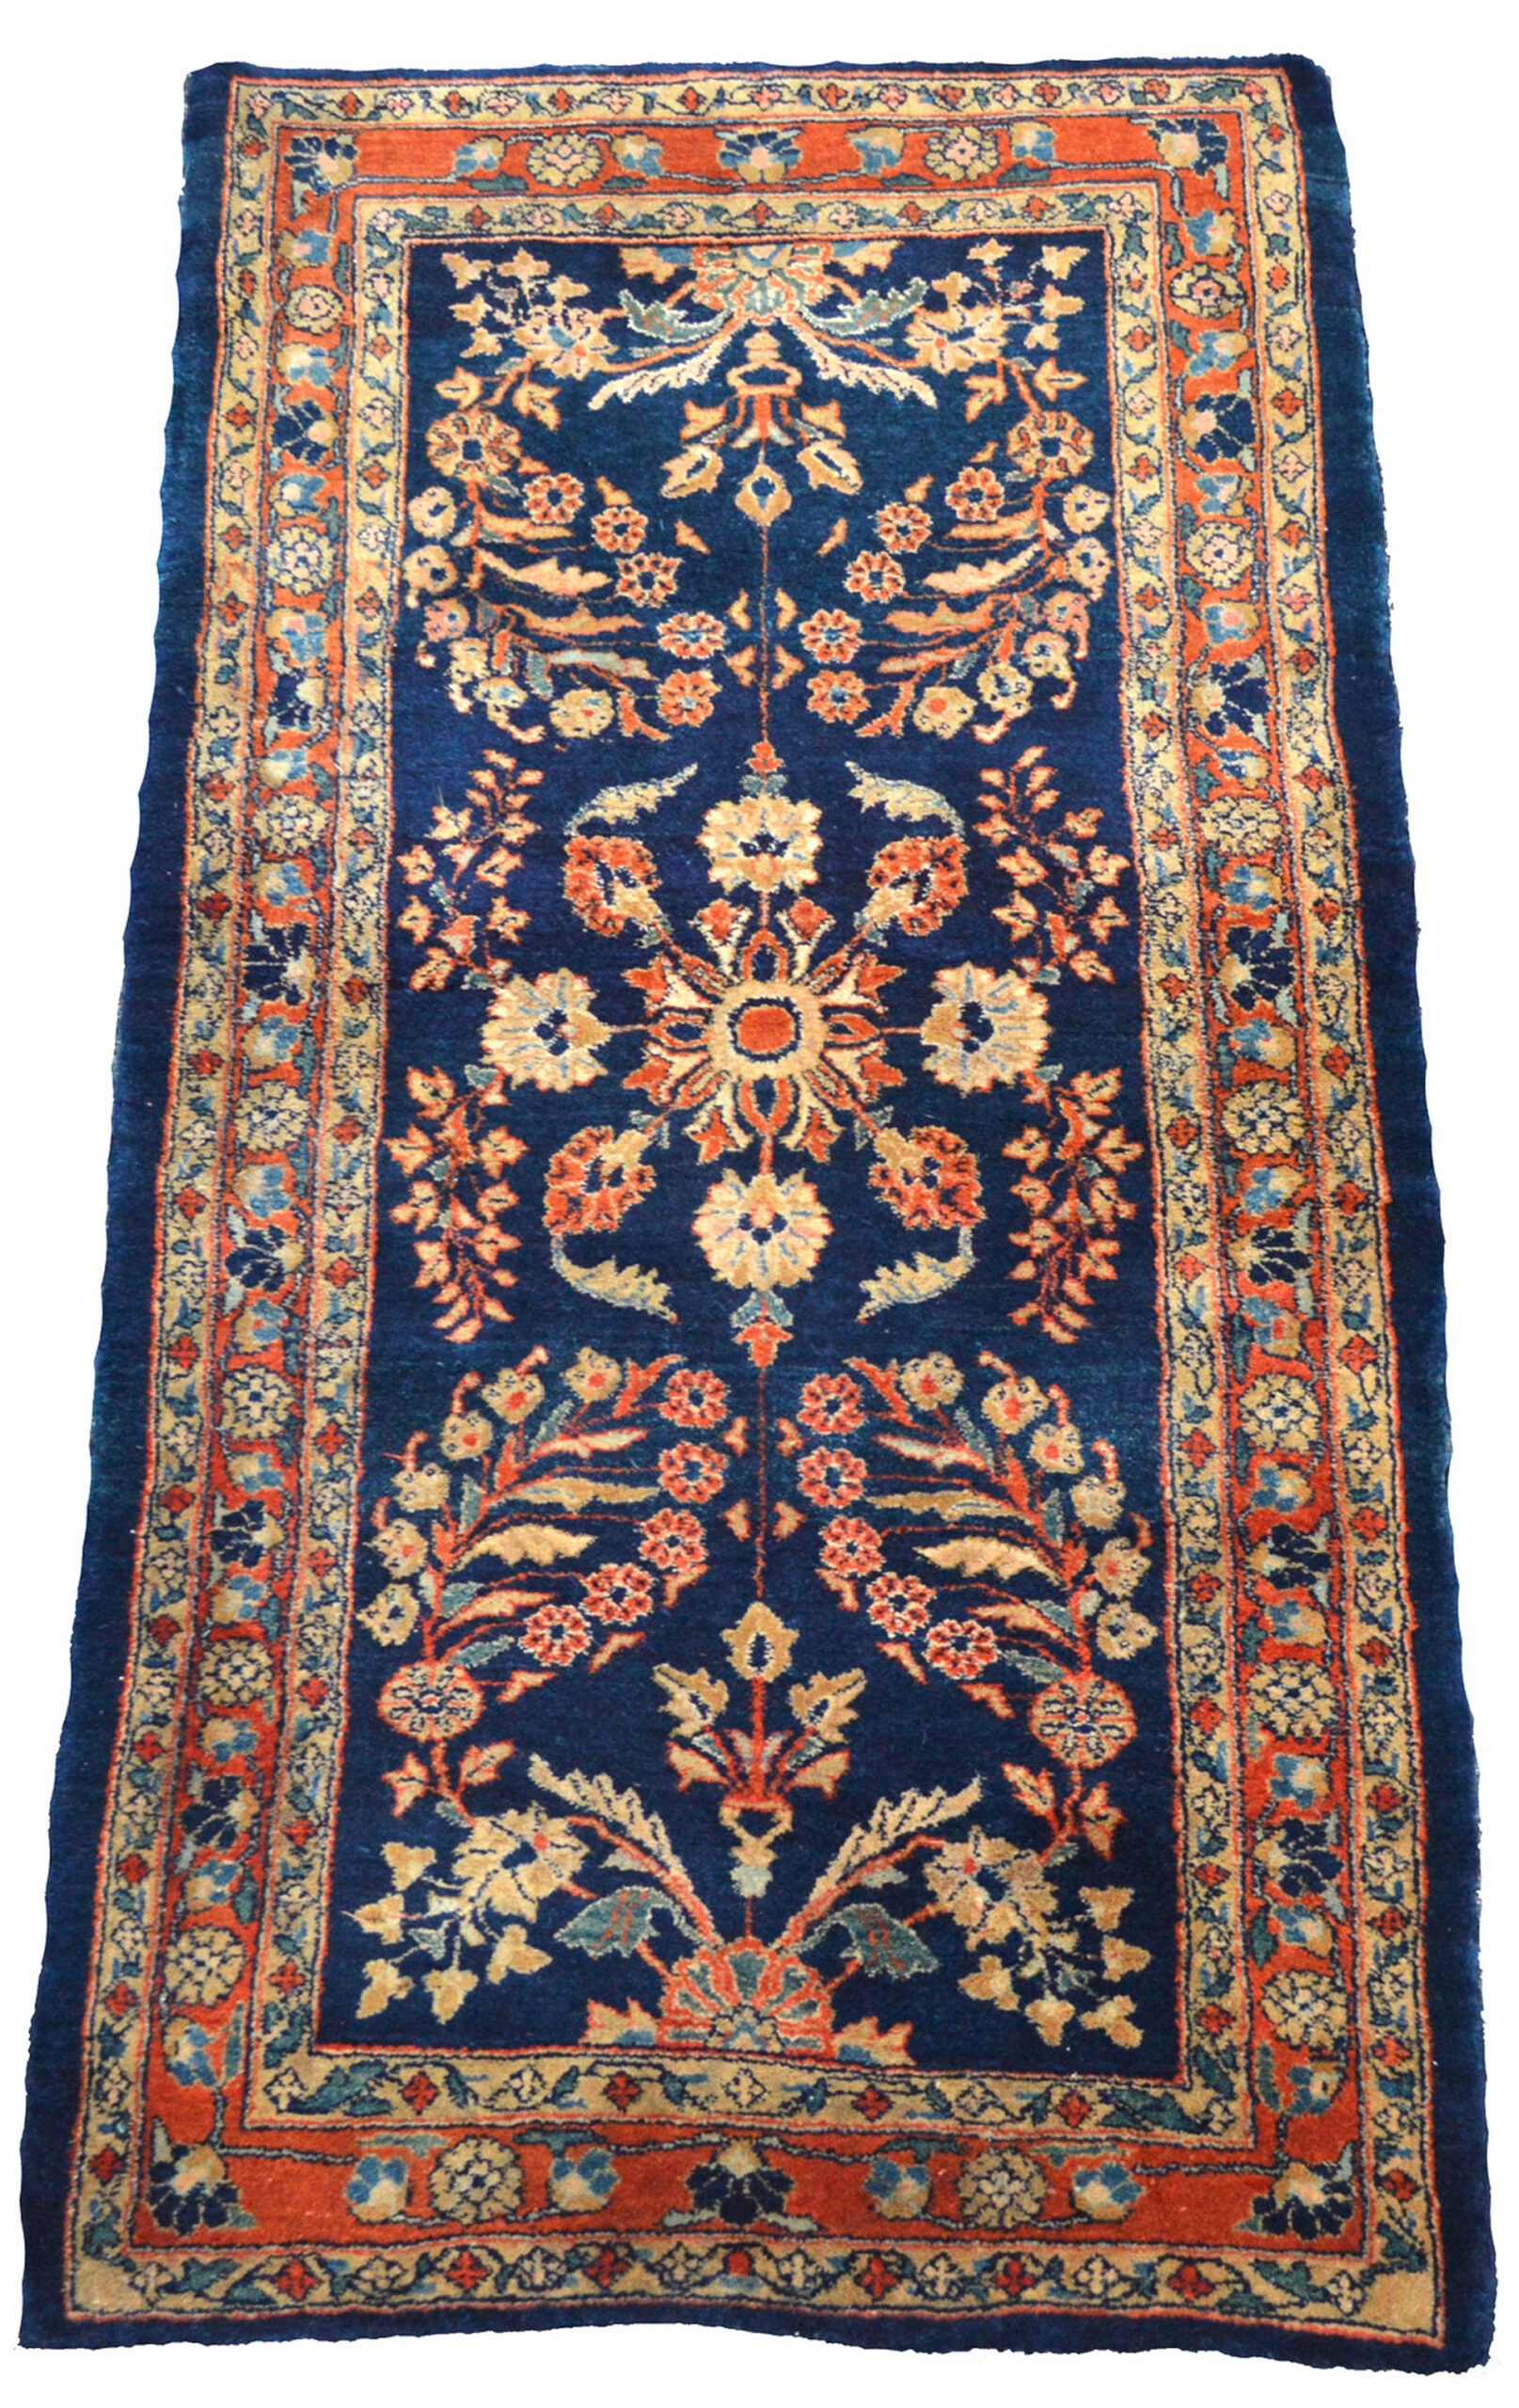 Persian Mahajaran Sarouk rug with a floral design on a navy blue field - Douglas Stock Gallery, antique Oriental rugs, Boston,MA area, South Natick / Wellesley area Oriental rugs